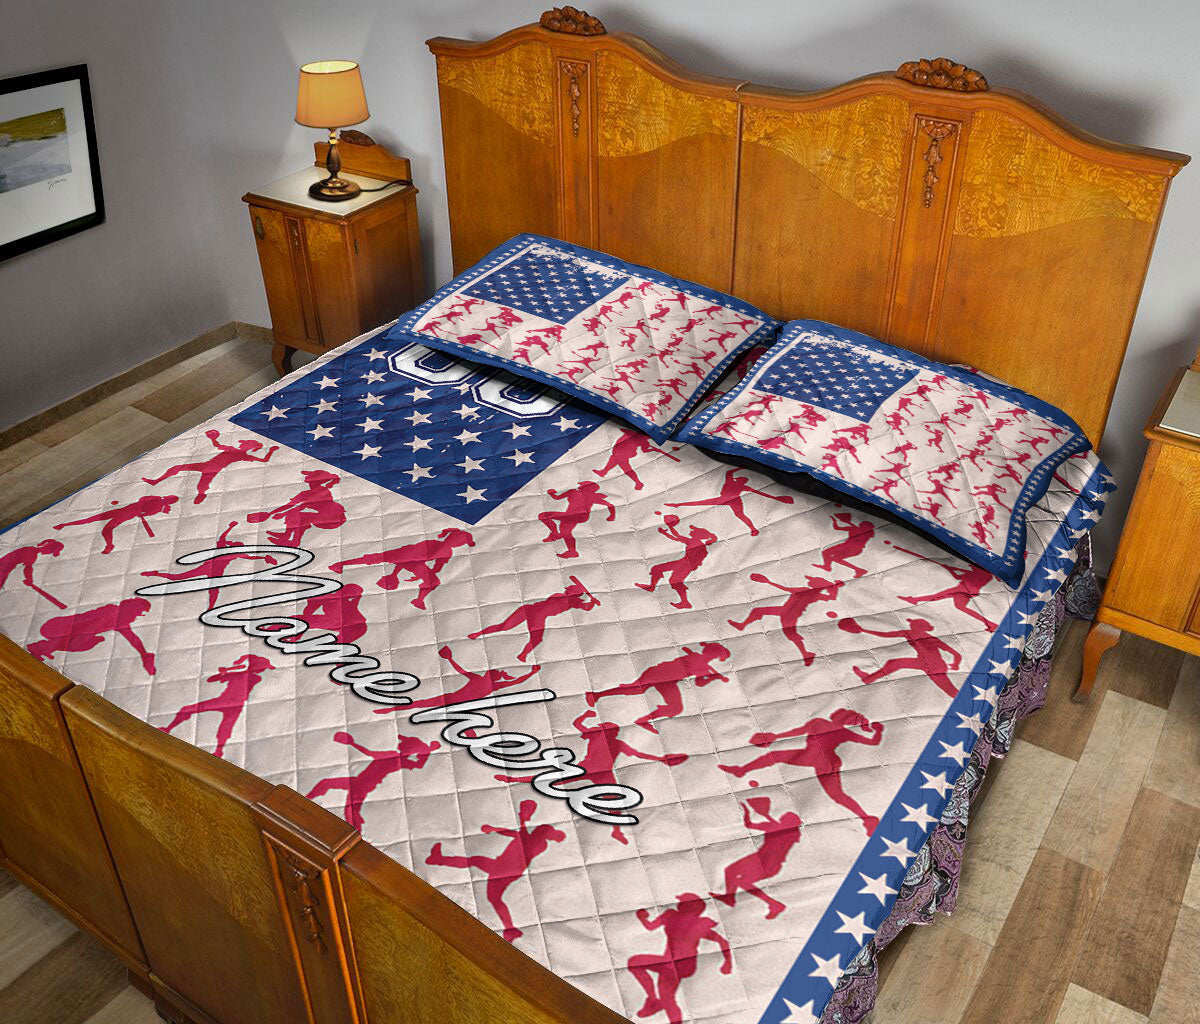 Ohaprints-Quilt-Bed-Set-Pillowcase-Baseball-Softball-Girl-Player-Posing-Us-Flag-Custom-Personalized-Name-Number-Blanket-Bedspread-Bedding-252-Queen (80'' x 90'')